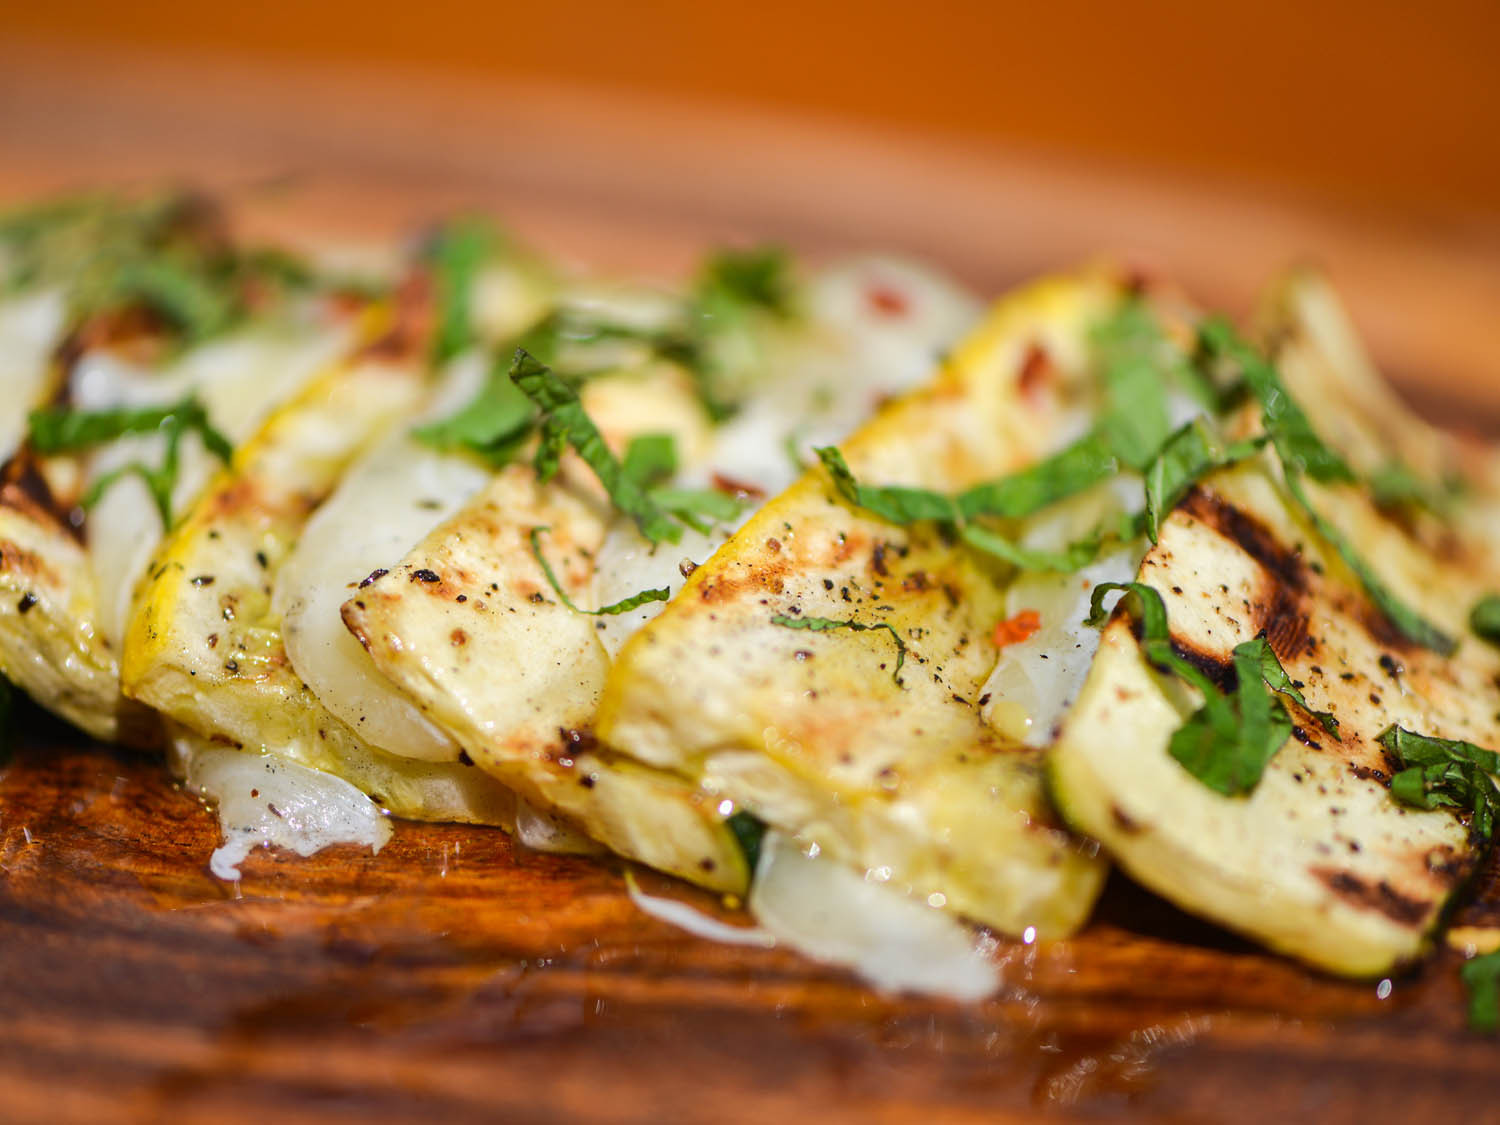 Summer Squash Recipe
 Grilled Summer Squash and Kasseri Cheese With Lemon and